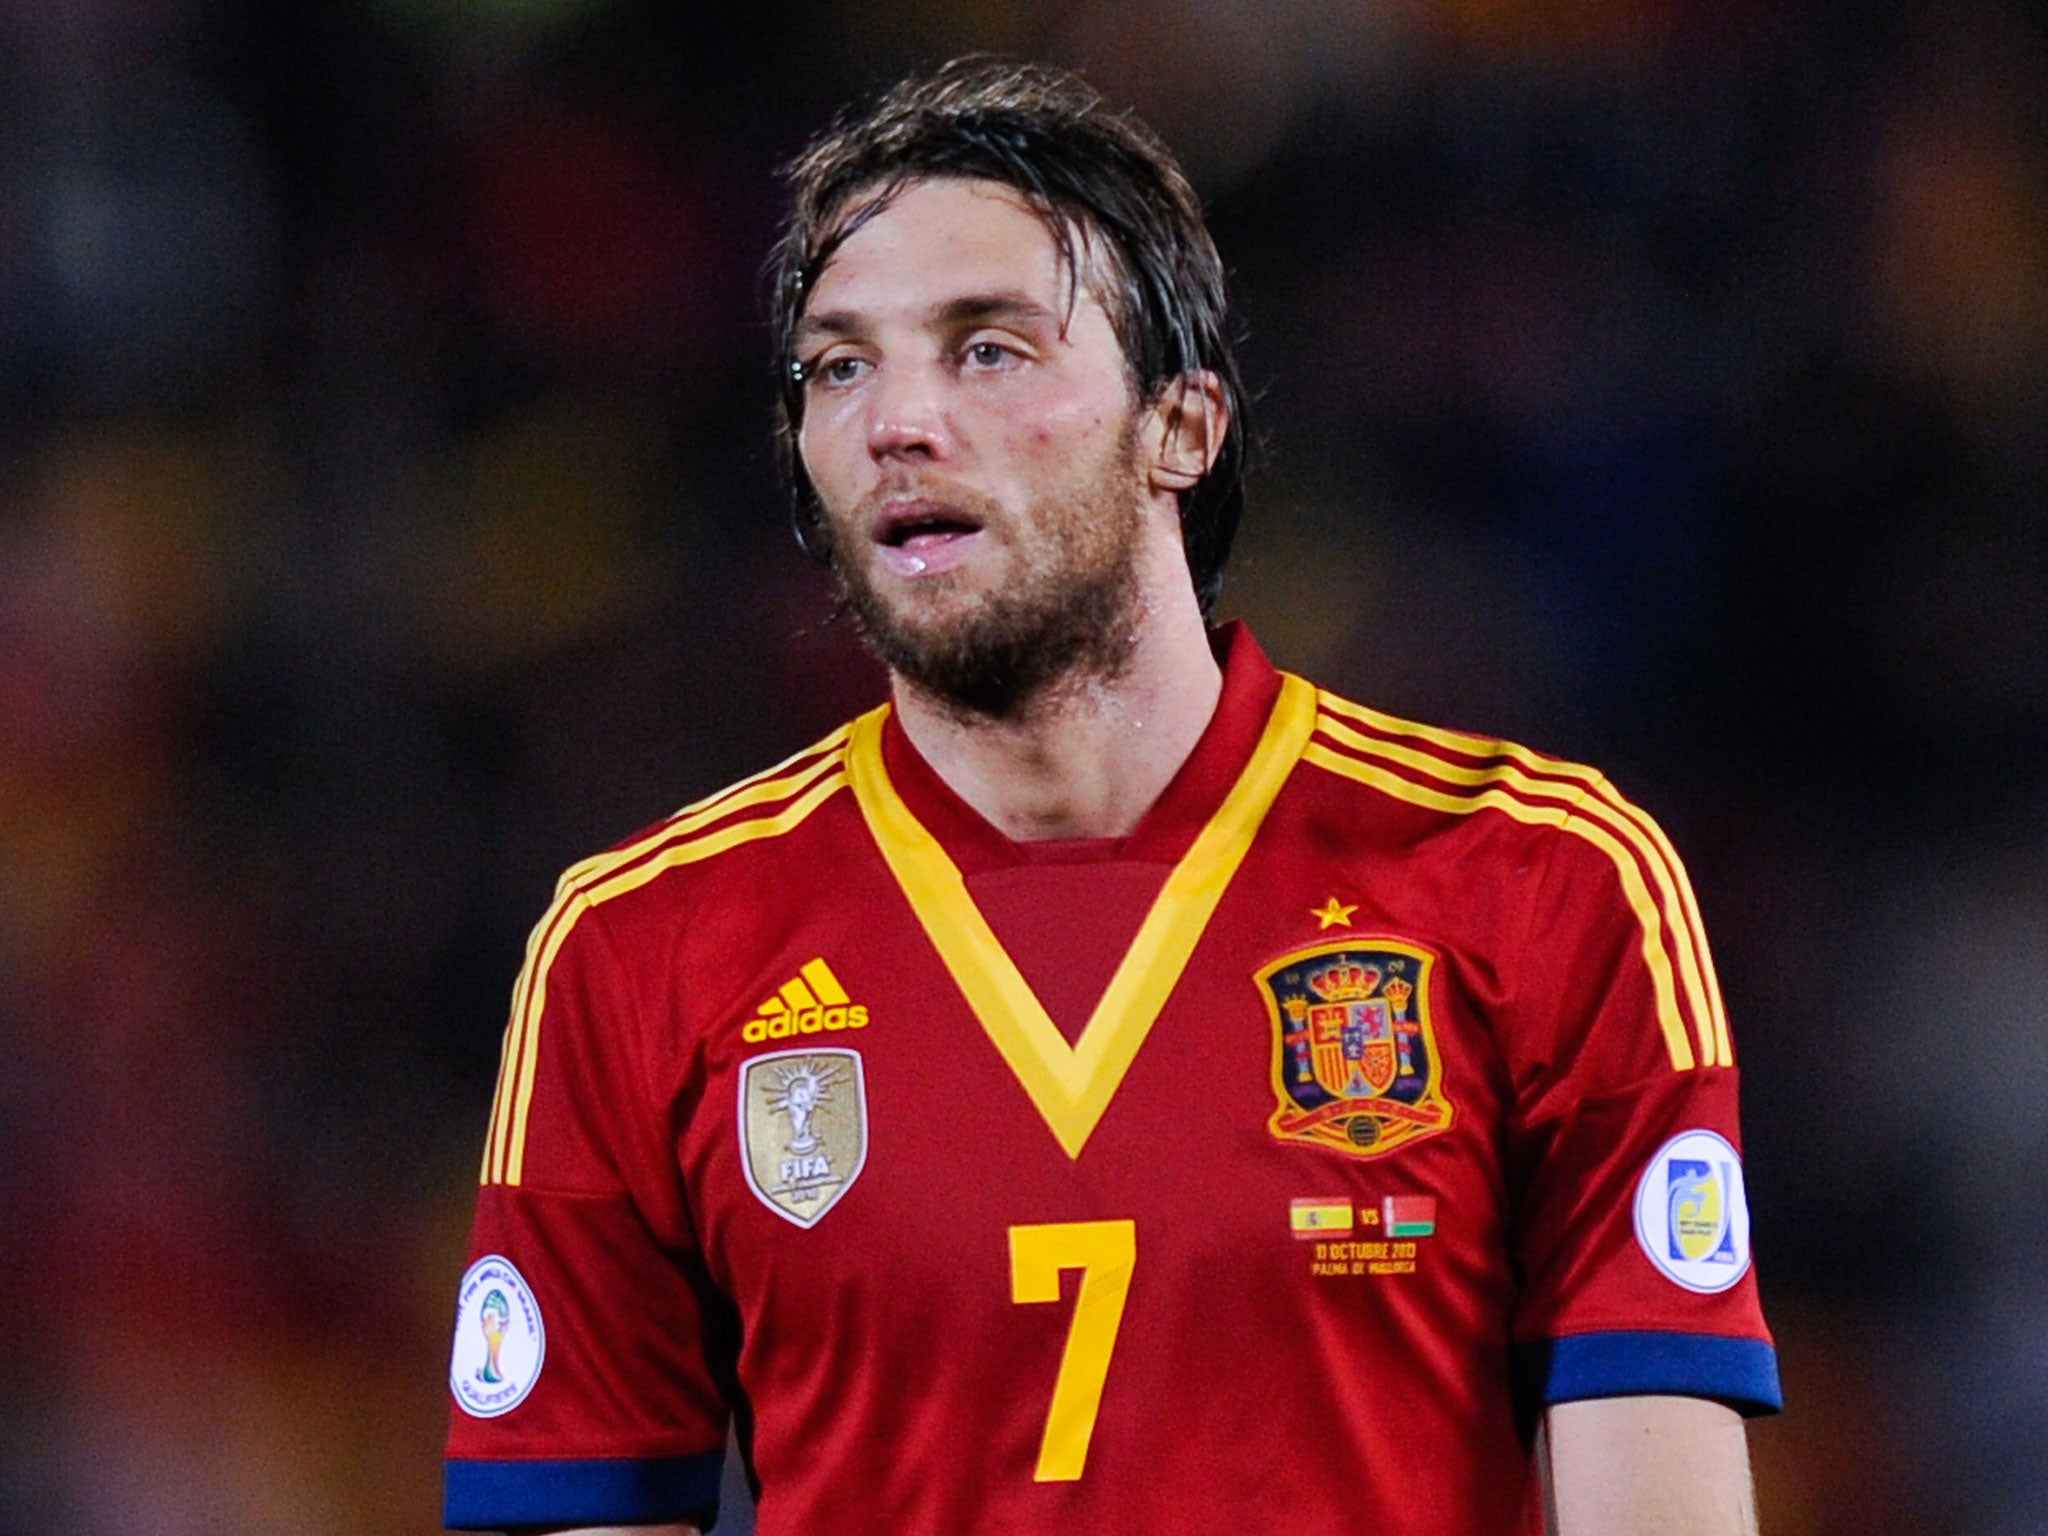 Michu made his Spain debut last week and his Swansea boss Michael Laudrup believes he is in with a chance of making their World Cup squad